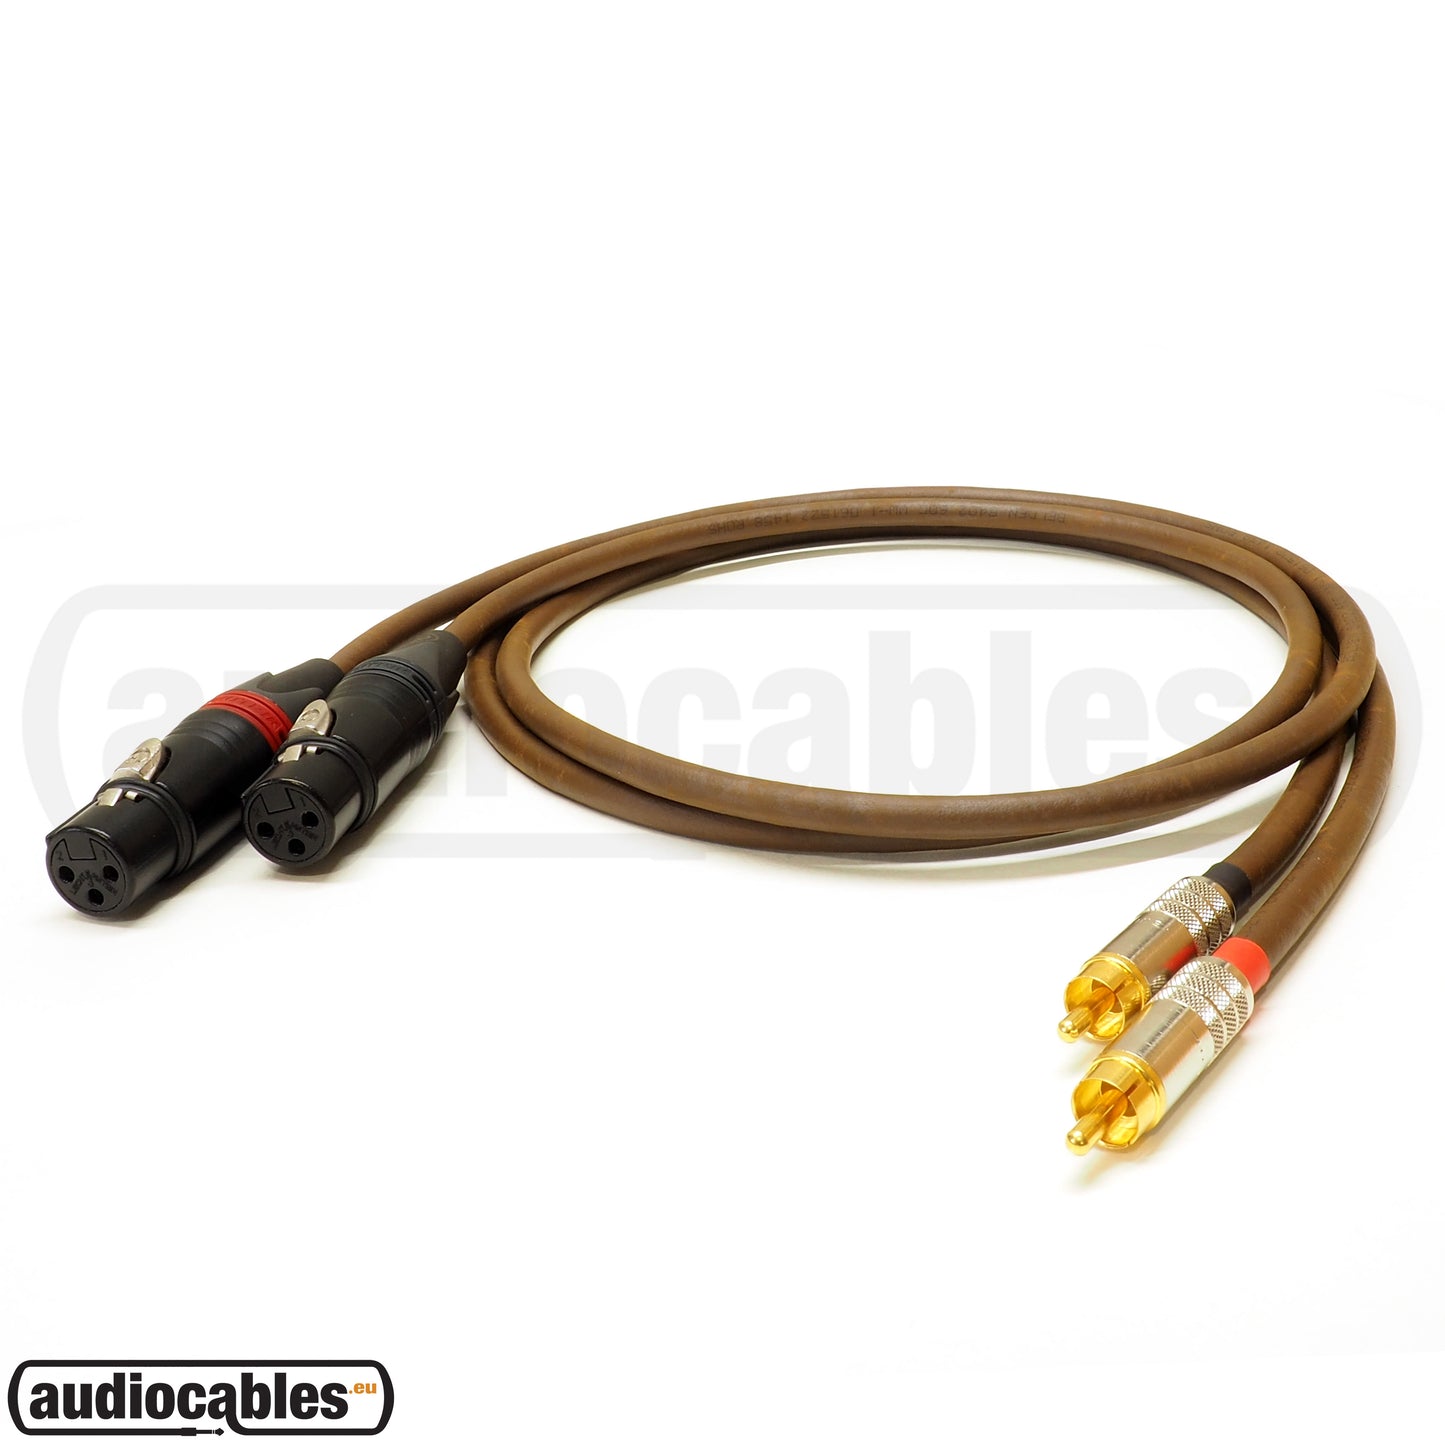 Belden 8402 RCA to FEMALE XLR Pair Cables w/ Gold Plated Switchcraft & Neutrik Connectors